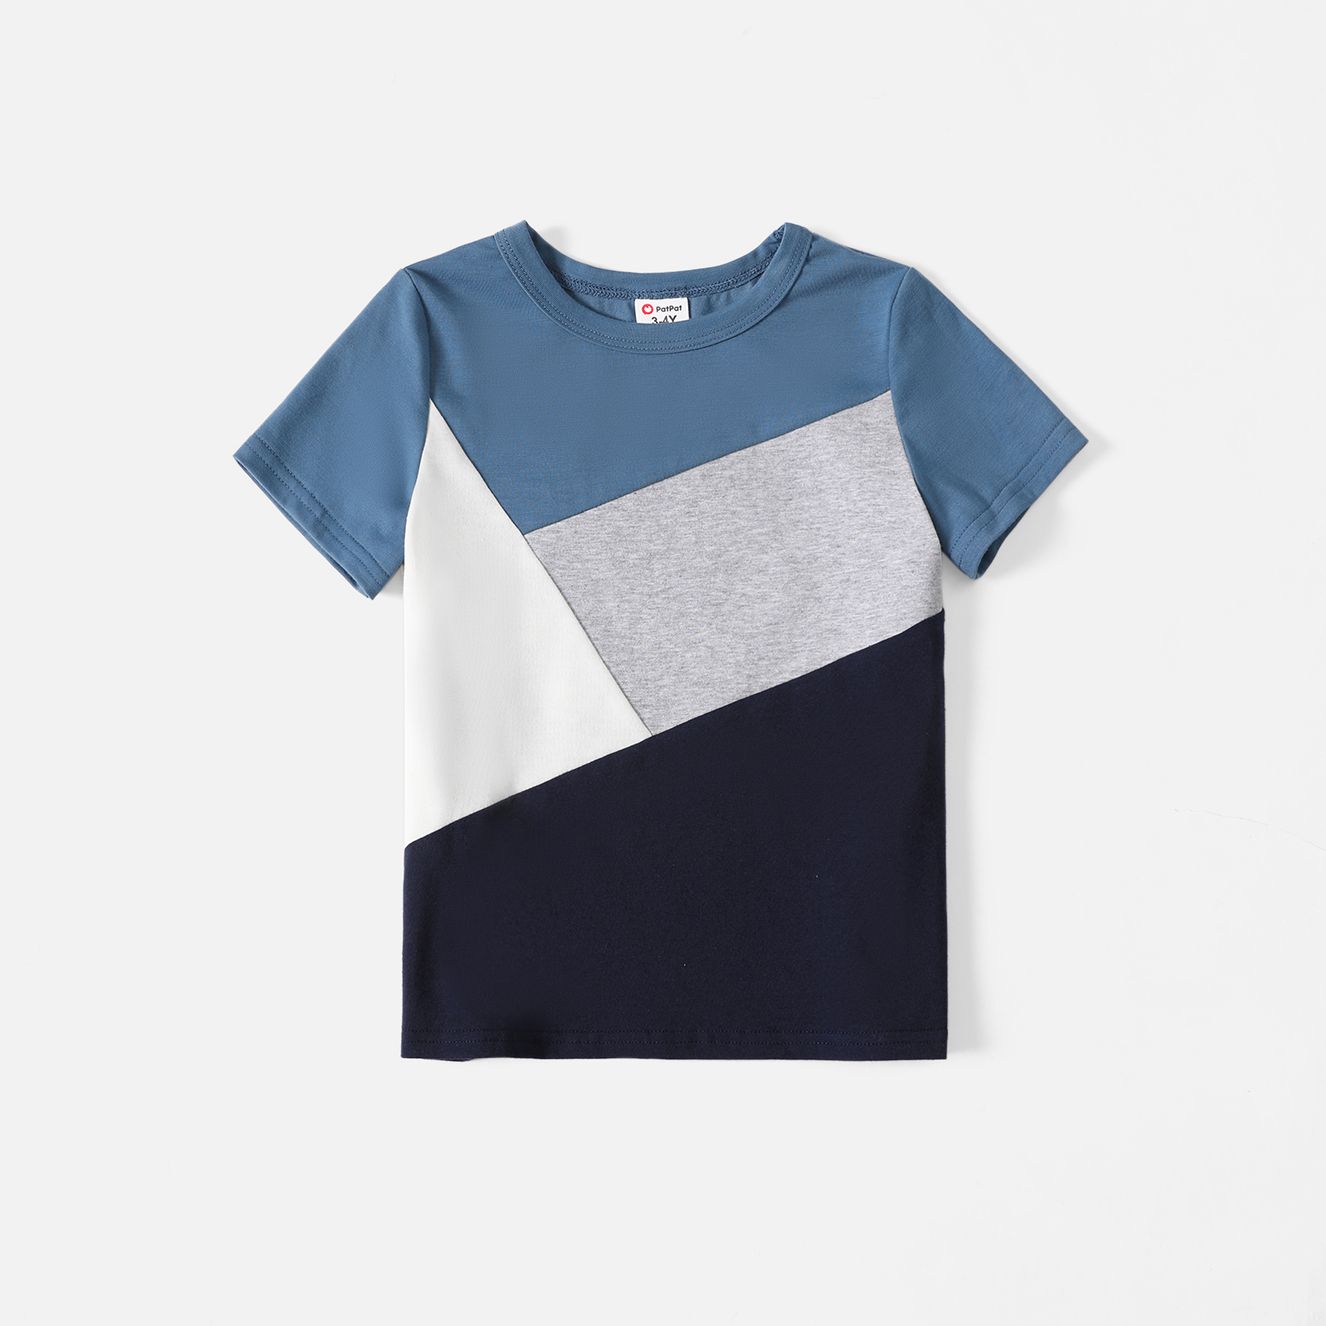 Family Matching Cotton Short-sleeve Colorblock T-shirts And Geo Print Belted Naia Dresses Sets